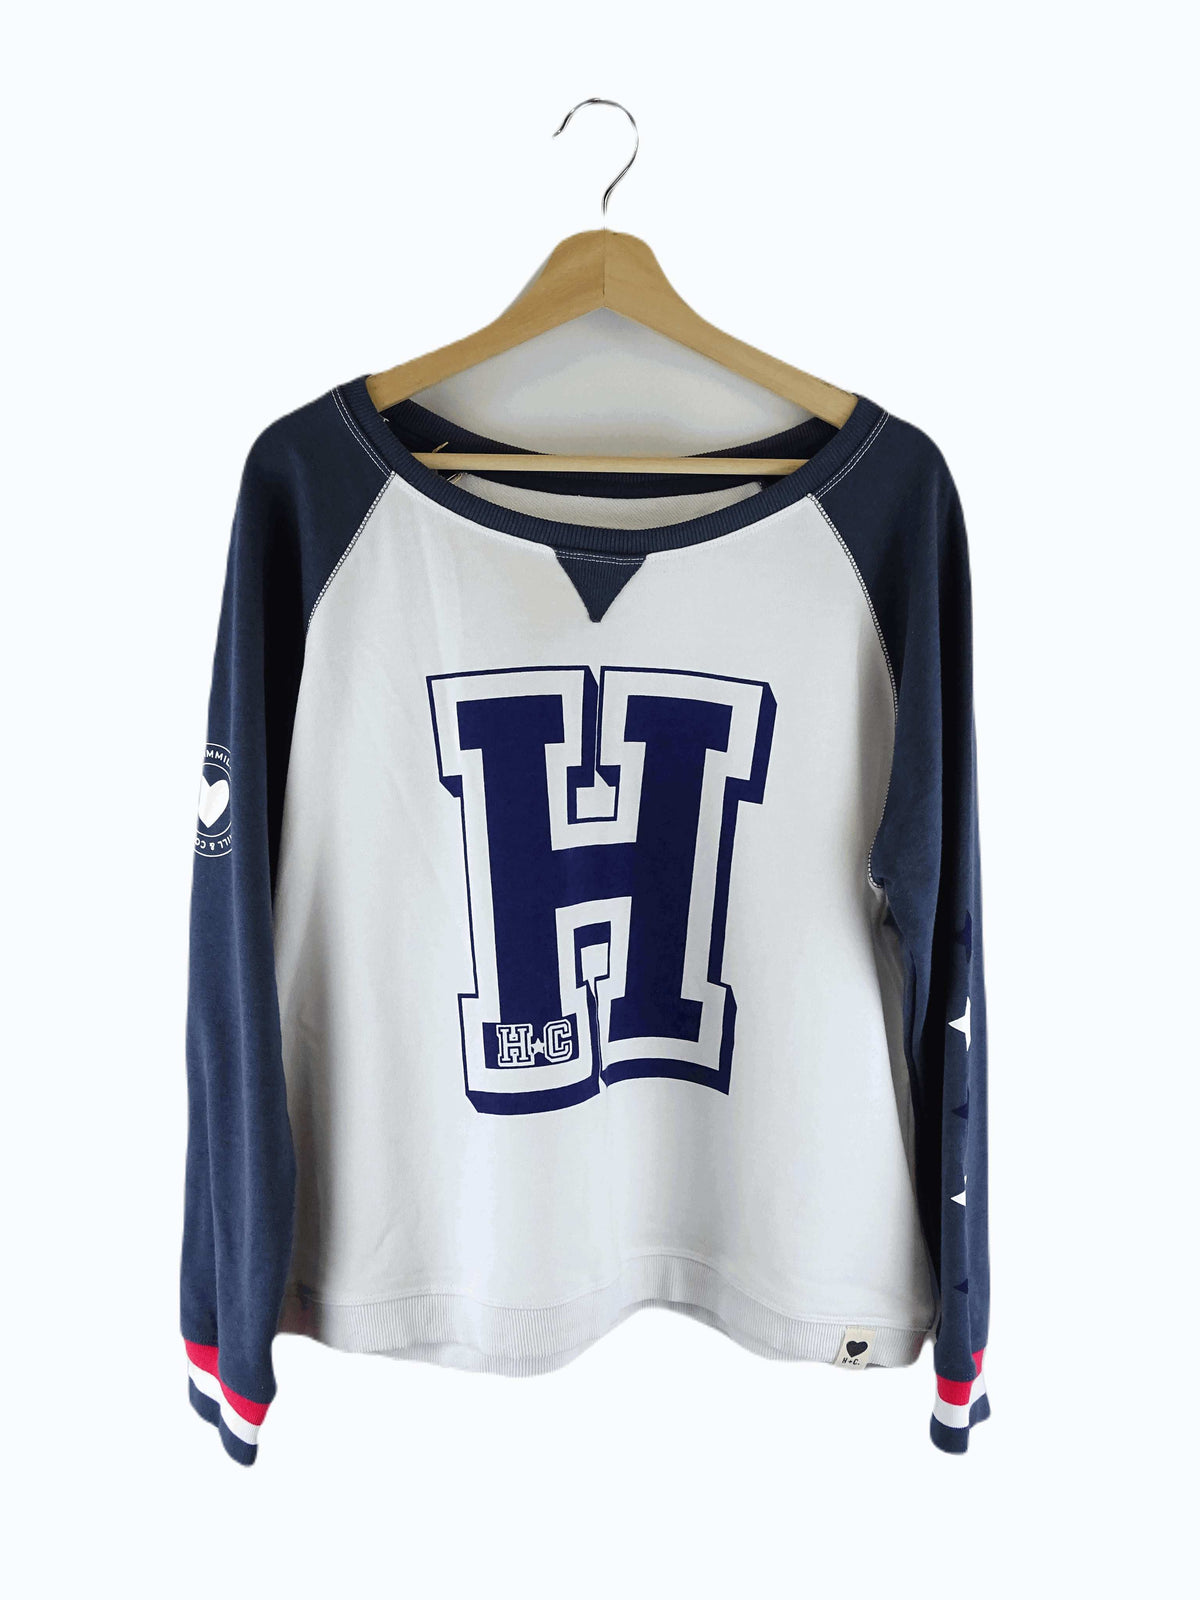 Hammill &amp; Co White and Blue Sweater S